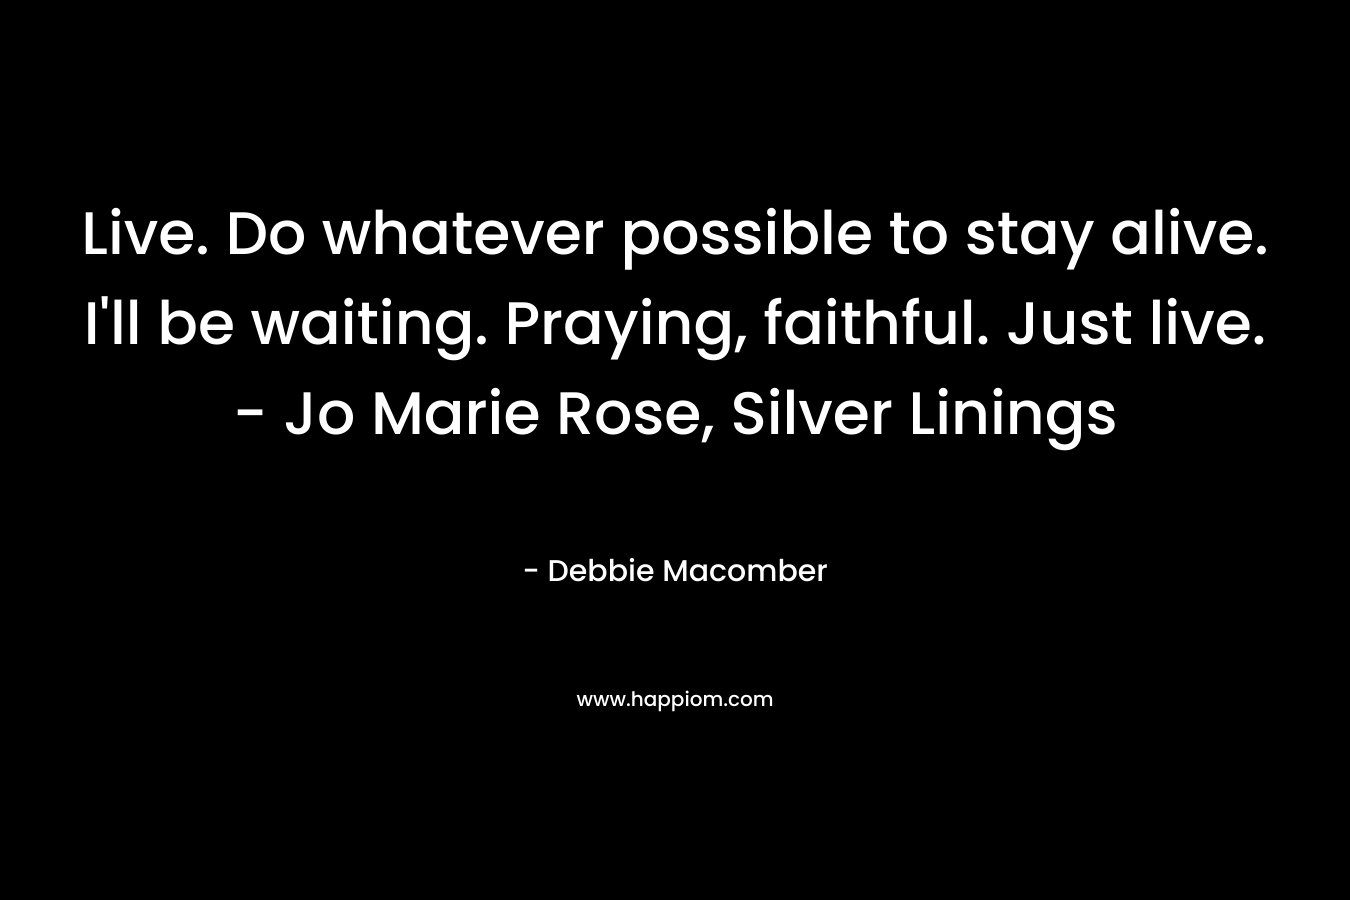 Live. Do whatever possible to stay alive. I'll be waiting. Praying, faithful. Just live. - Jo Marie Rose, Silver Linings